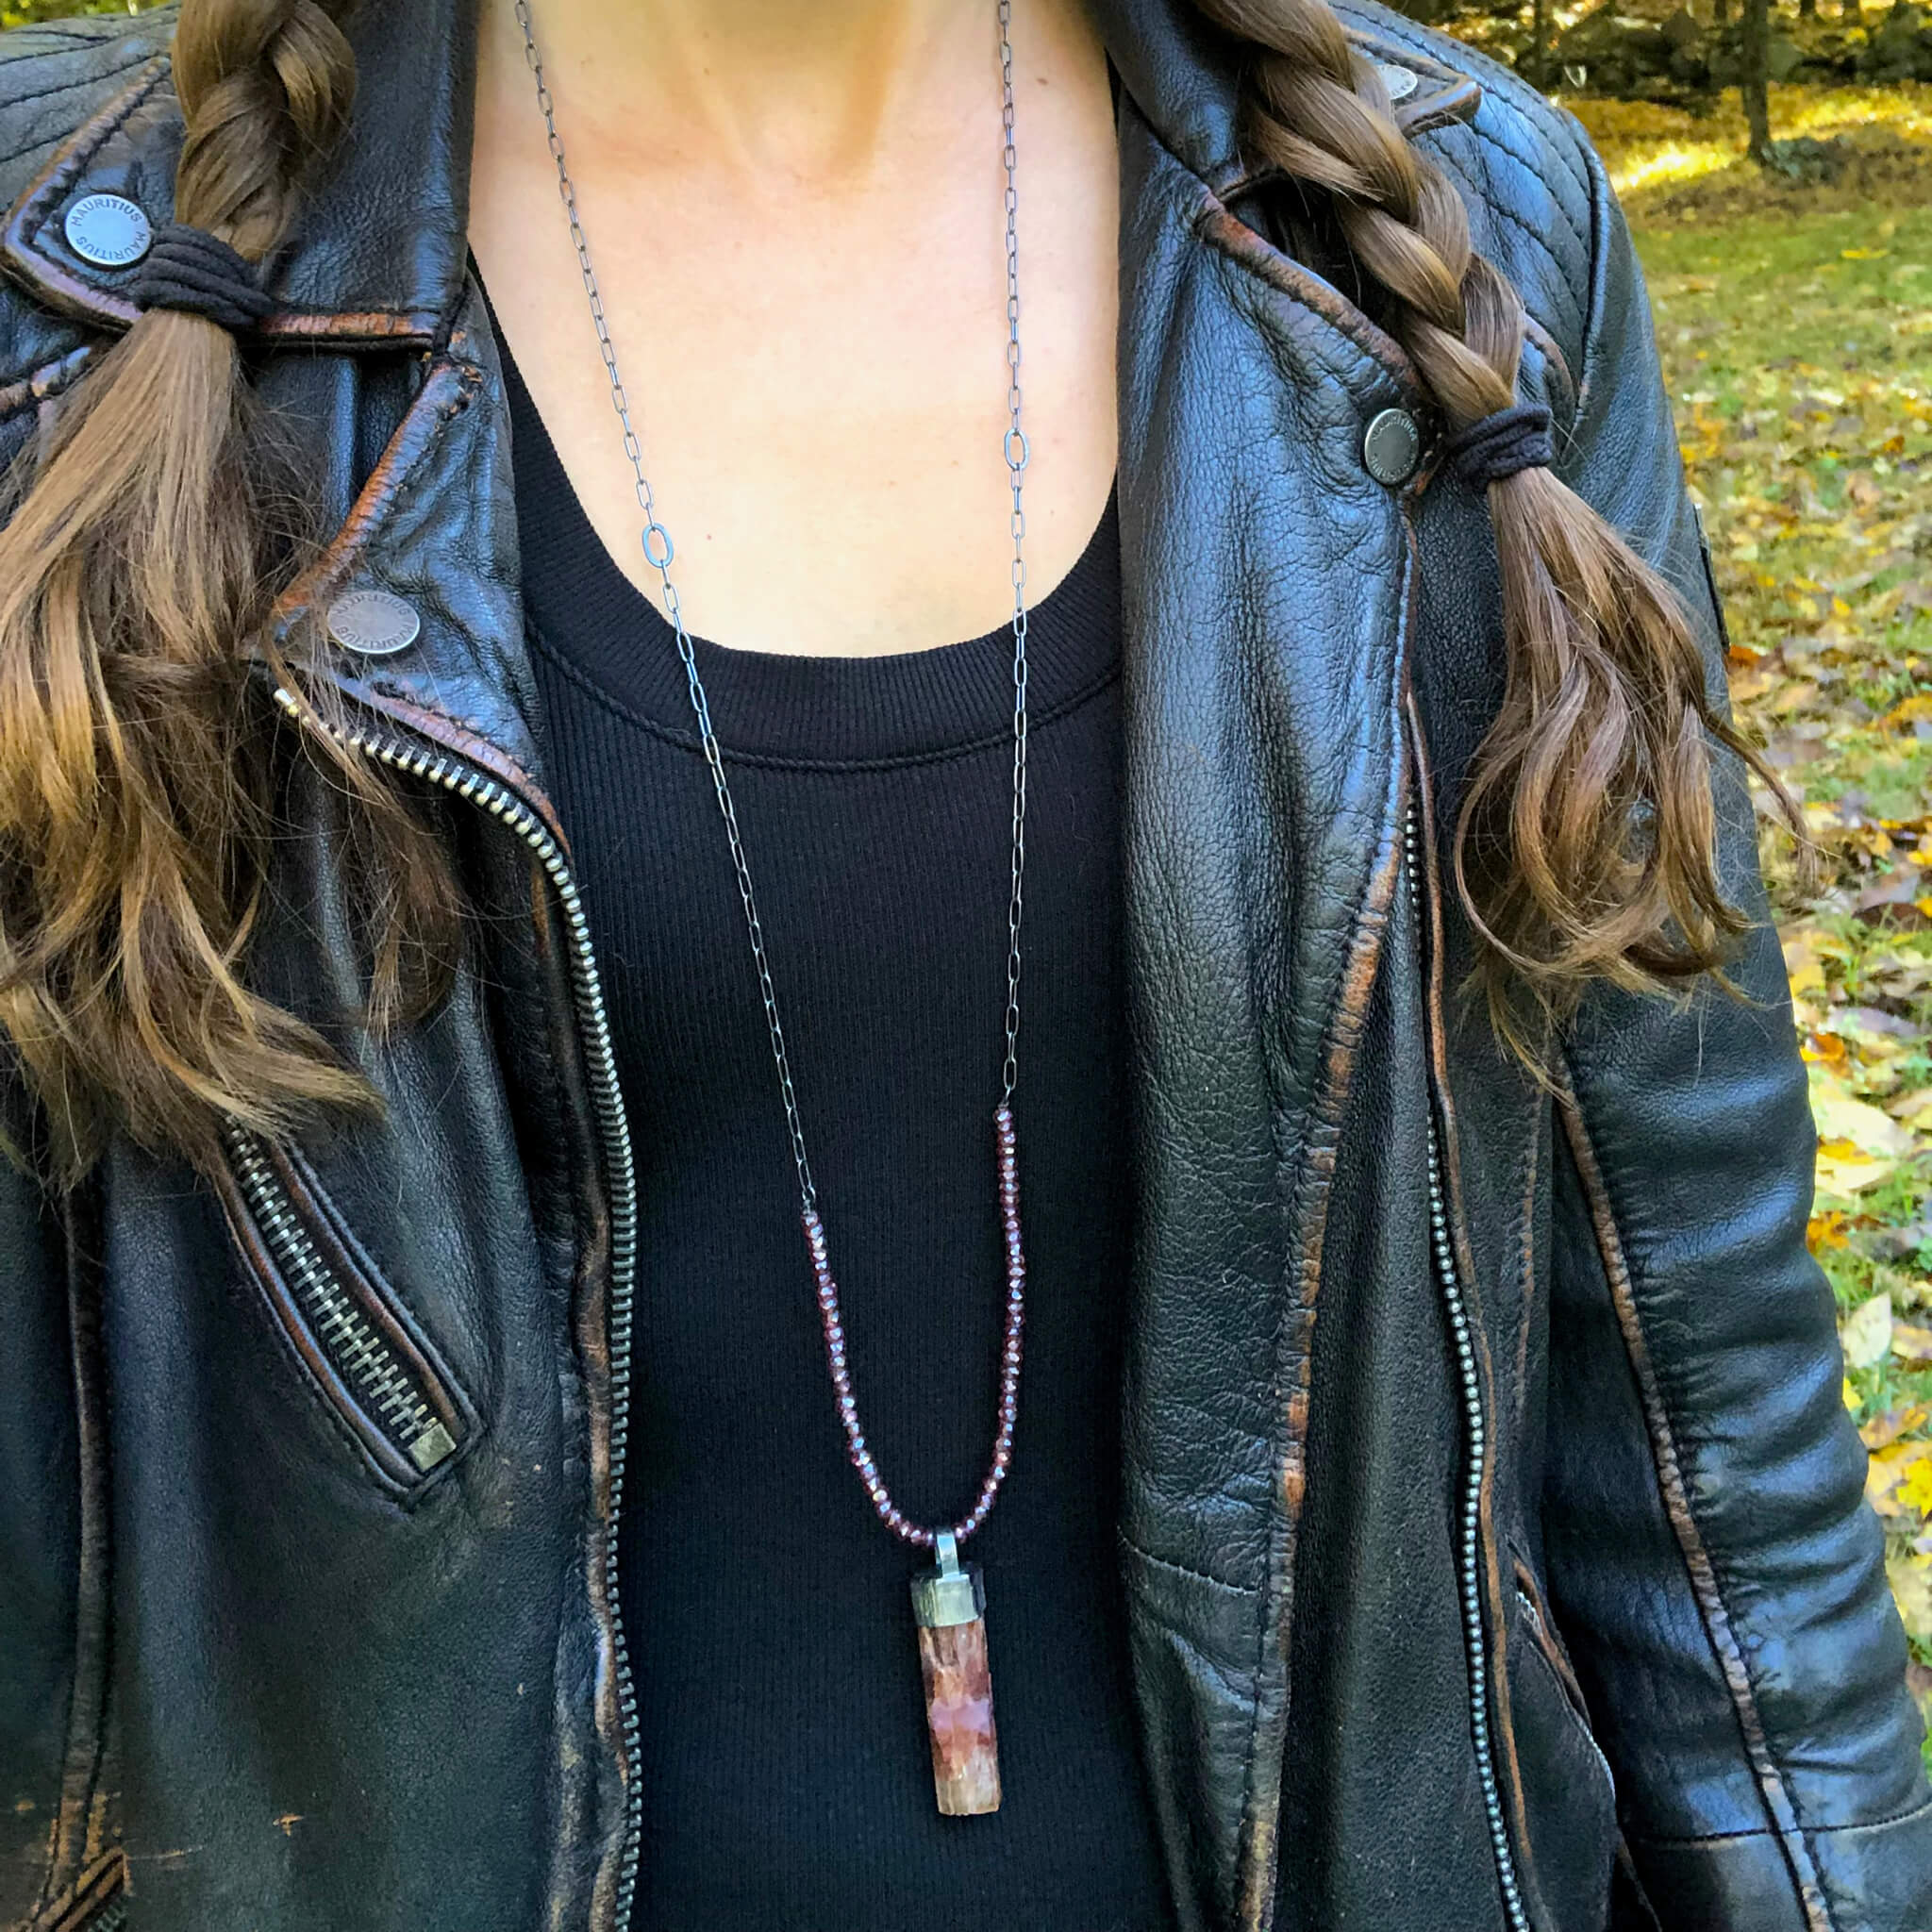 Aragonite Crystal + Garnet Bead Necklace. Season of the Witch collection by Alex Lozier Jewelry.